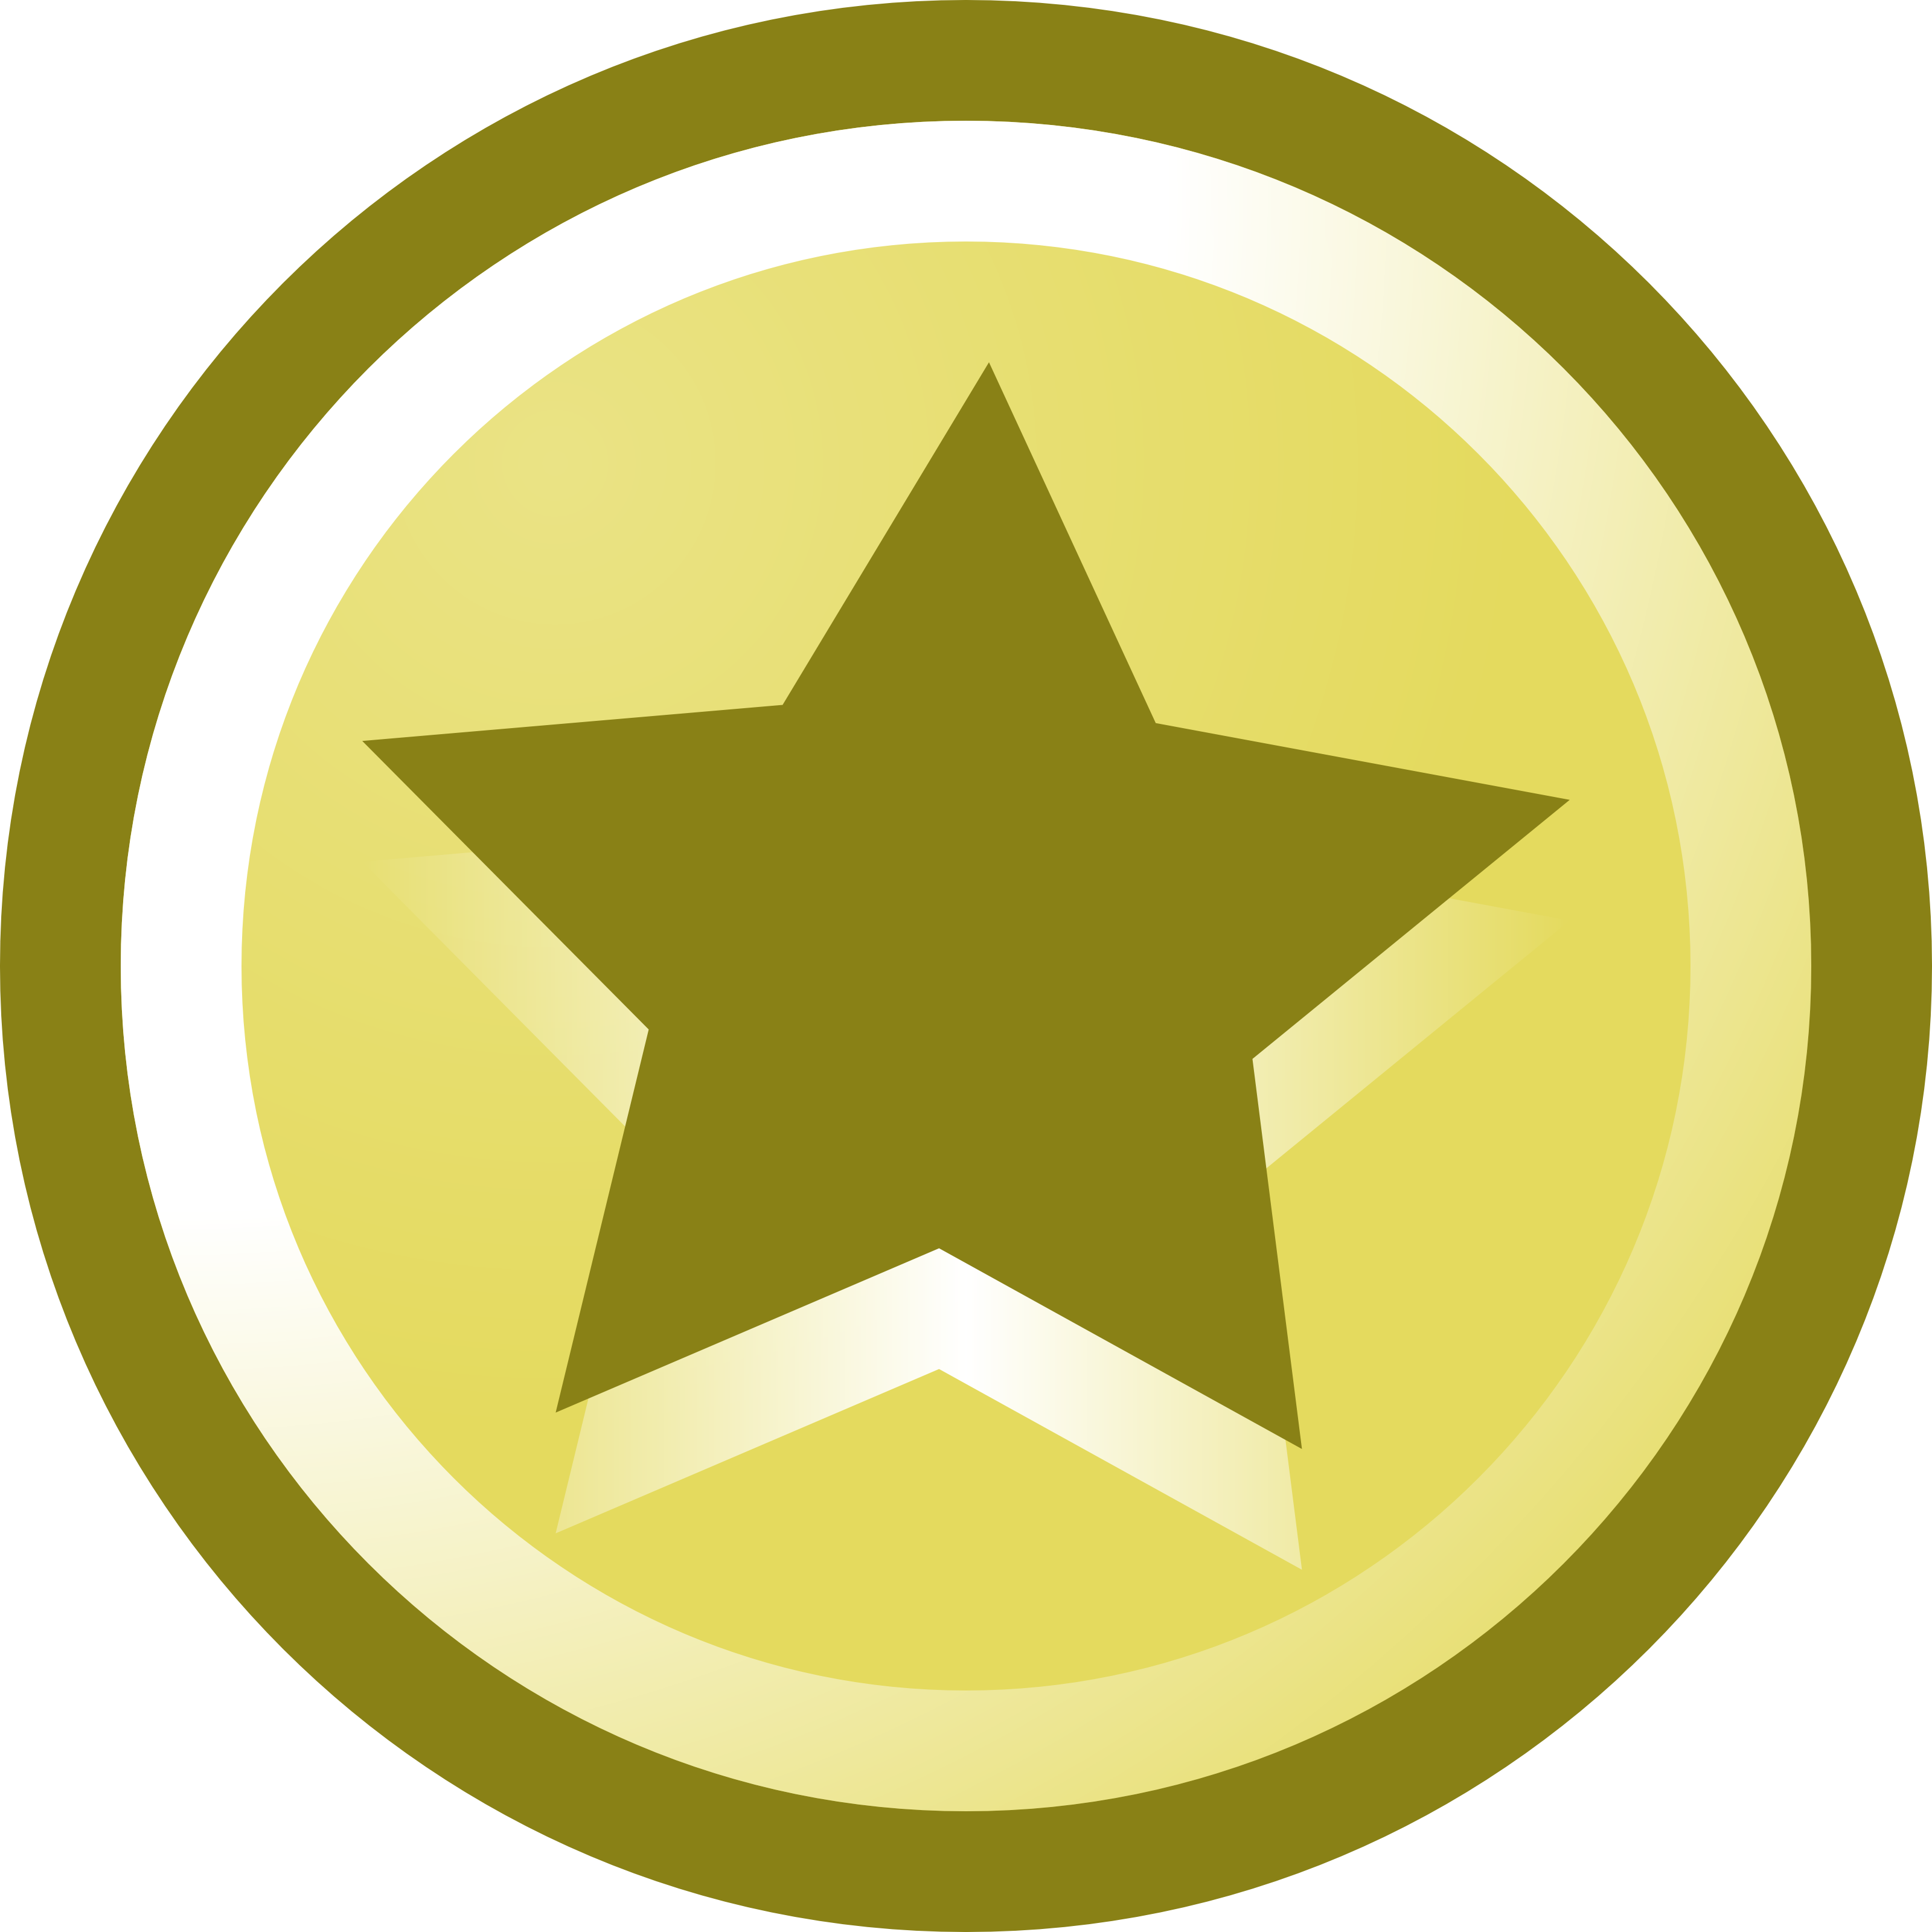 Free Vector Illustration Of A Star Icon - Free Star Icon Vector (3200x3200)